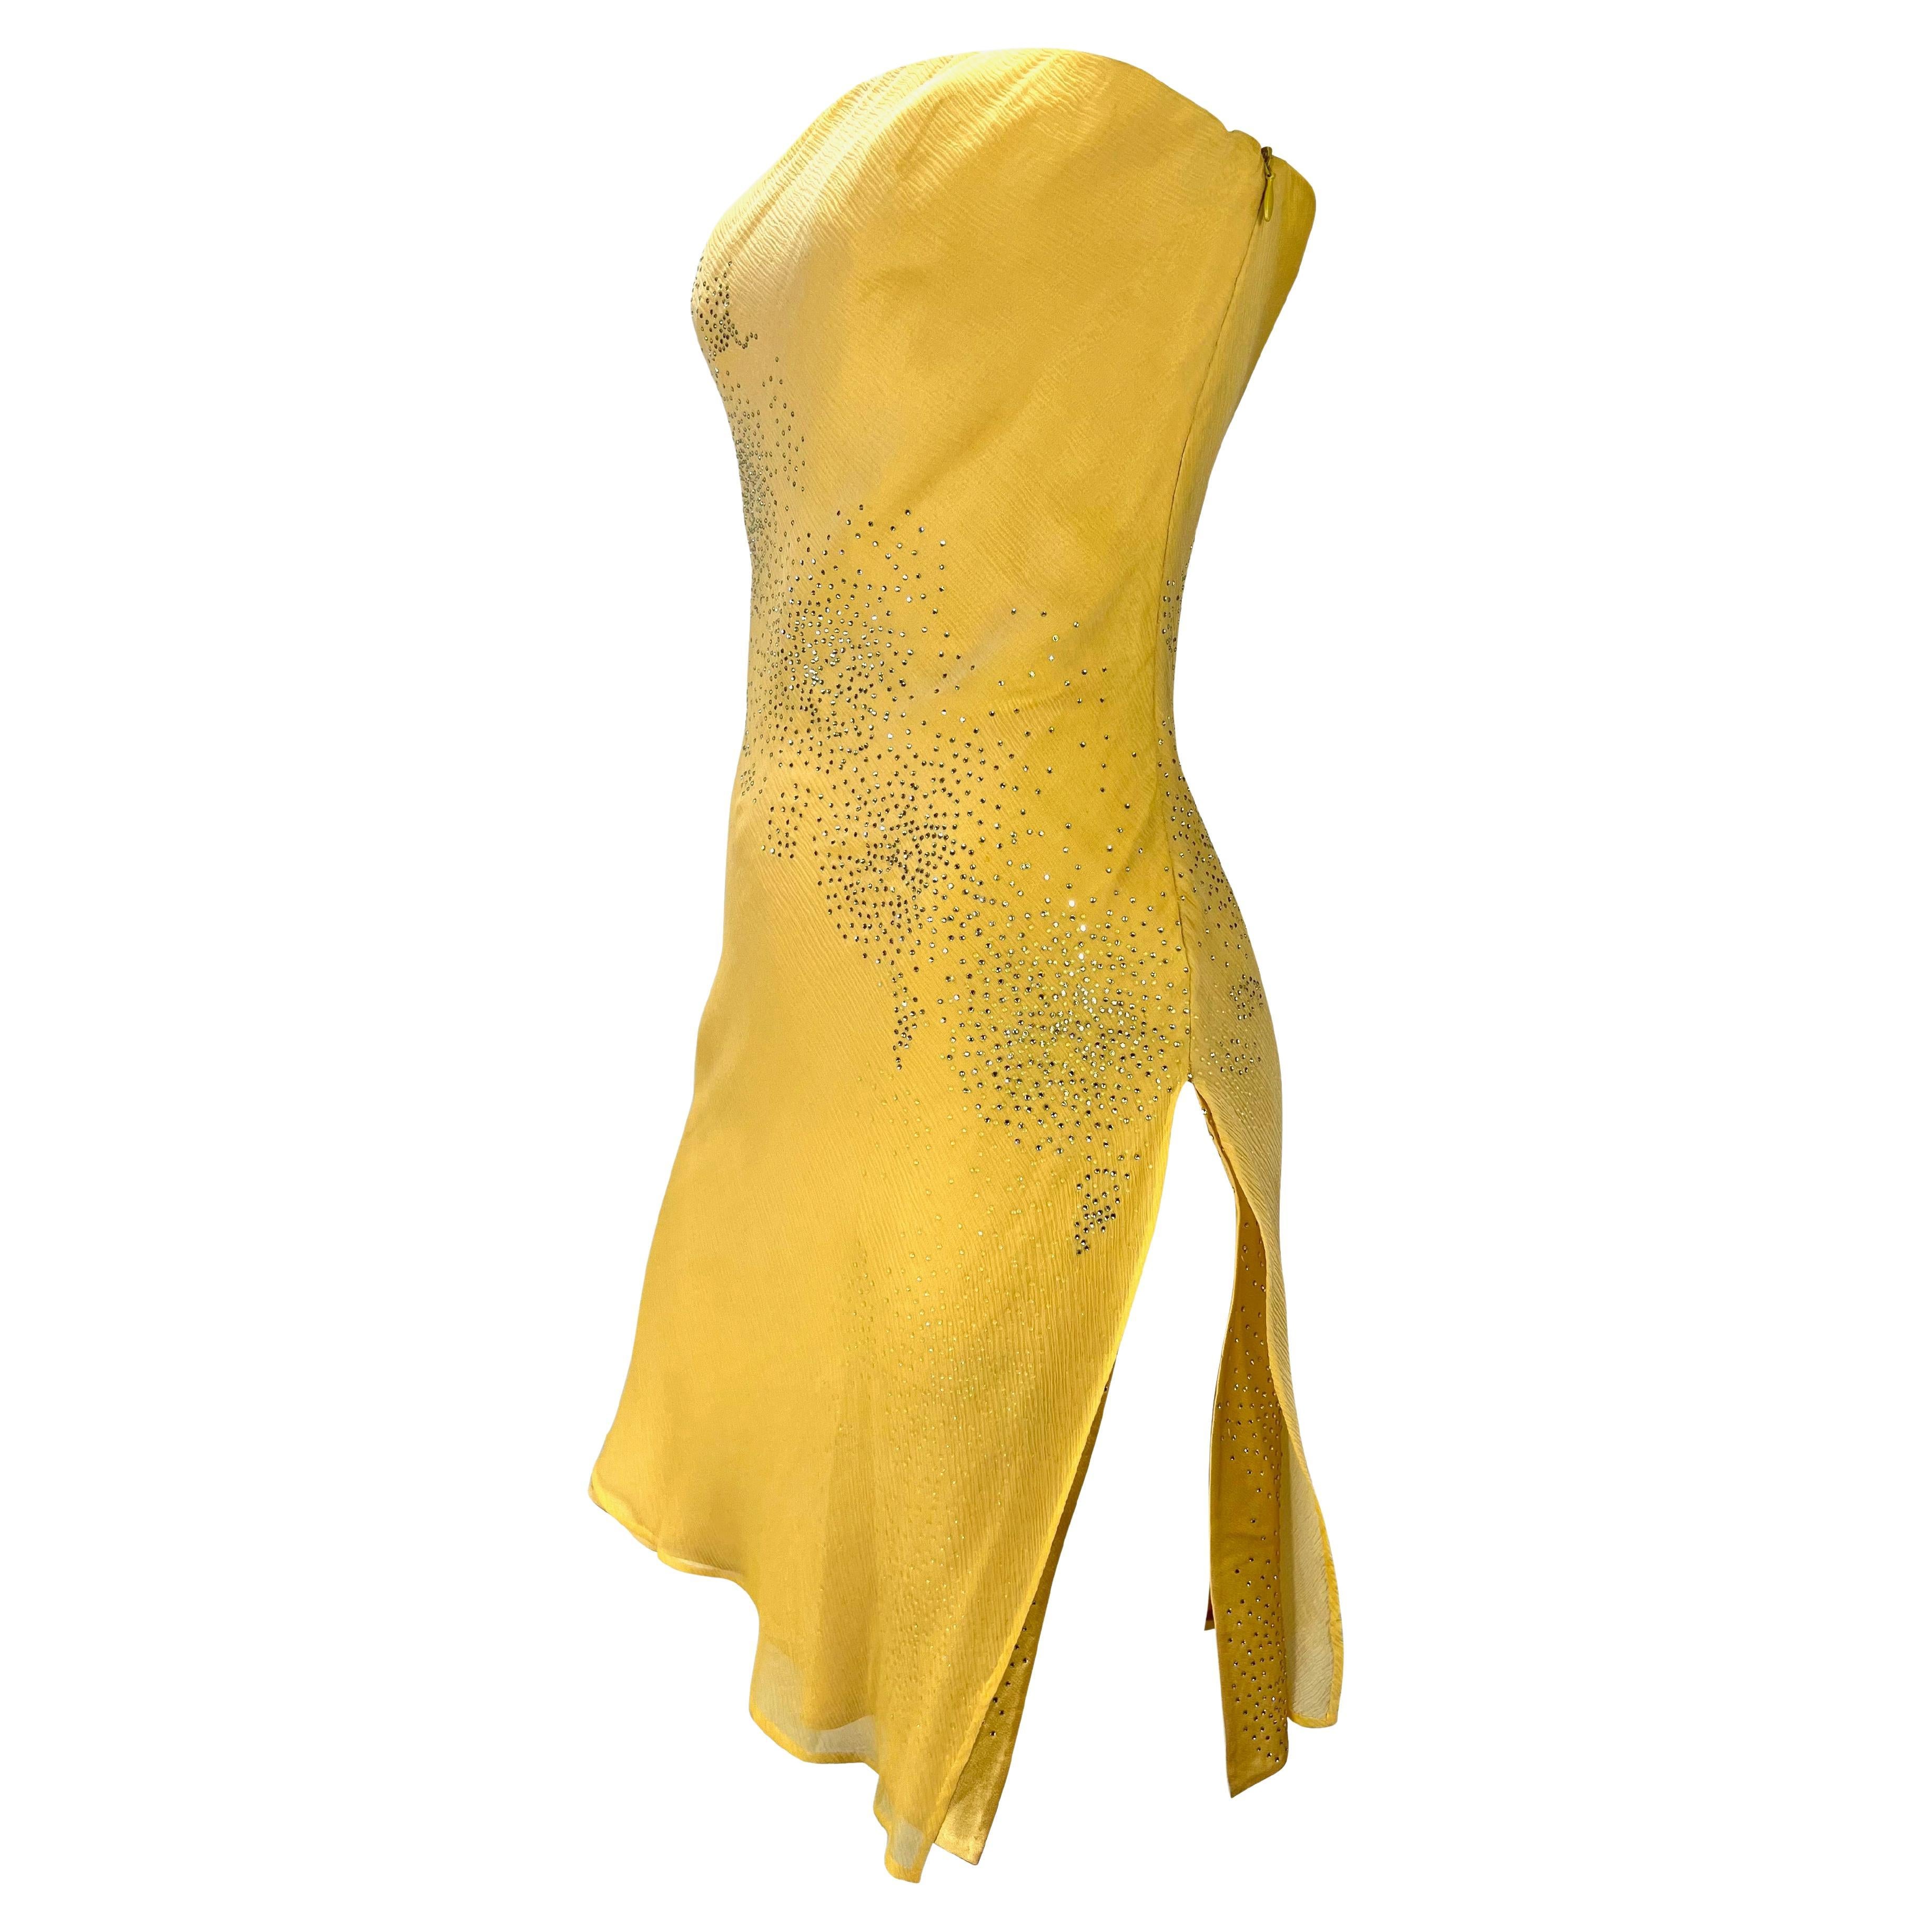 Presenting a stunning light yellow strapless Atelier Versace mini dress, designed by Donatella Versace. From the early 2000s, this ultra-sexy mini dress is constructed of light yellow chiffon and is accented with rhinestones scattered throughout.